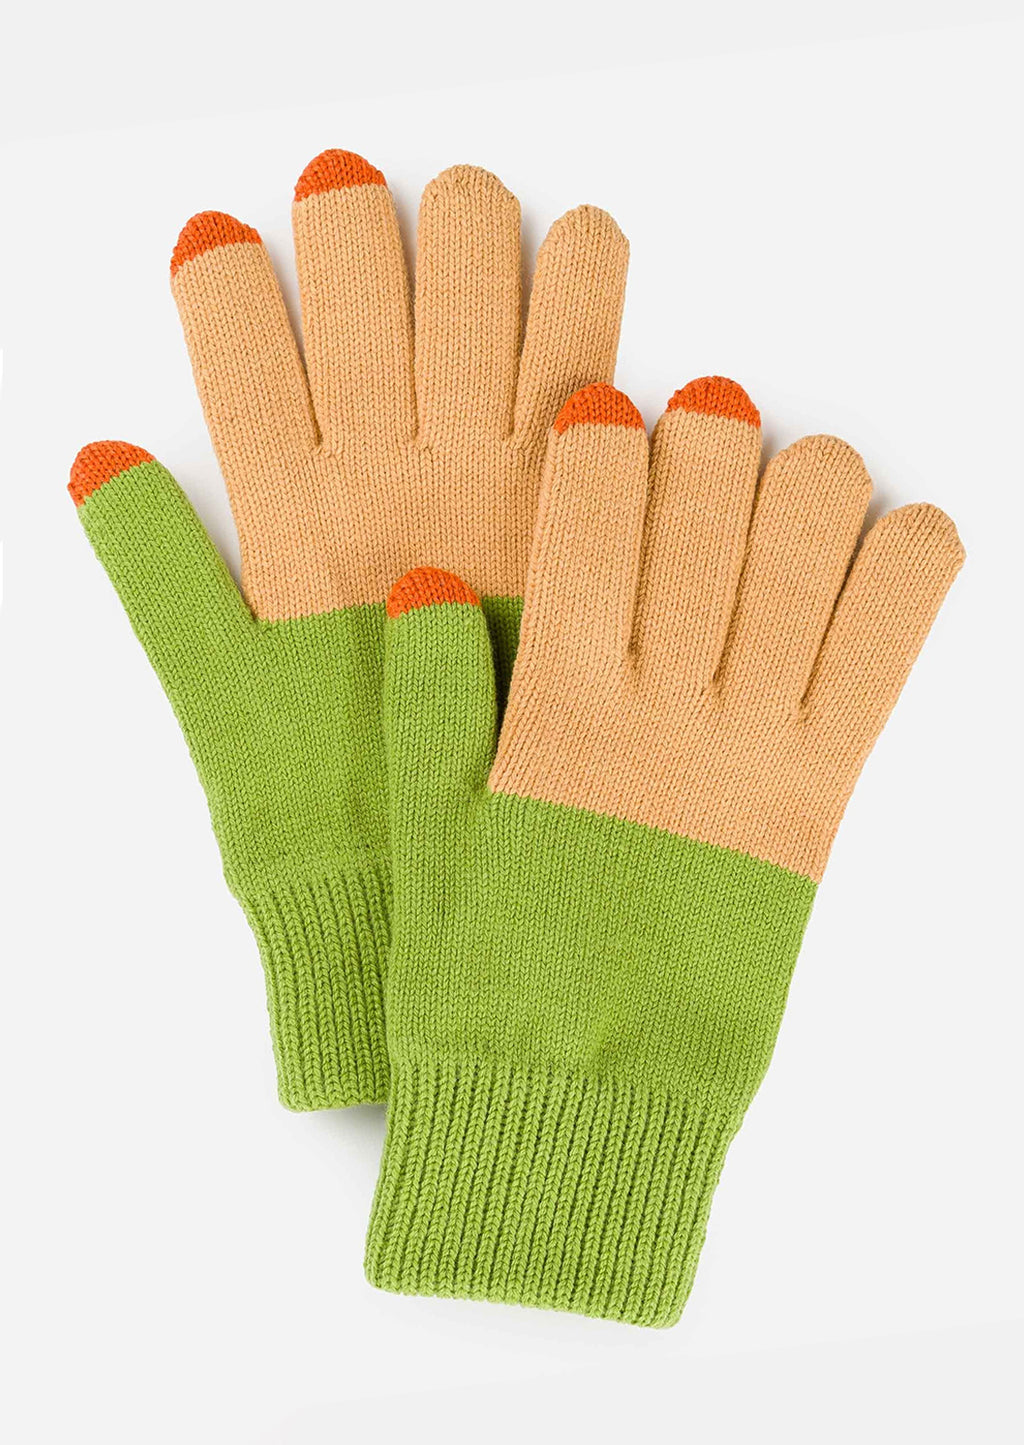 Kiwi / Camel: A colorblock pair of knit yarn gloves in camel and kiwi with orange tips.